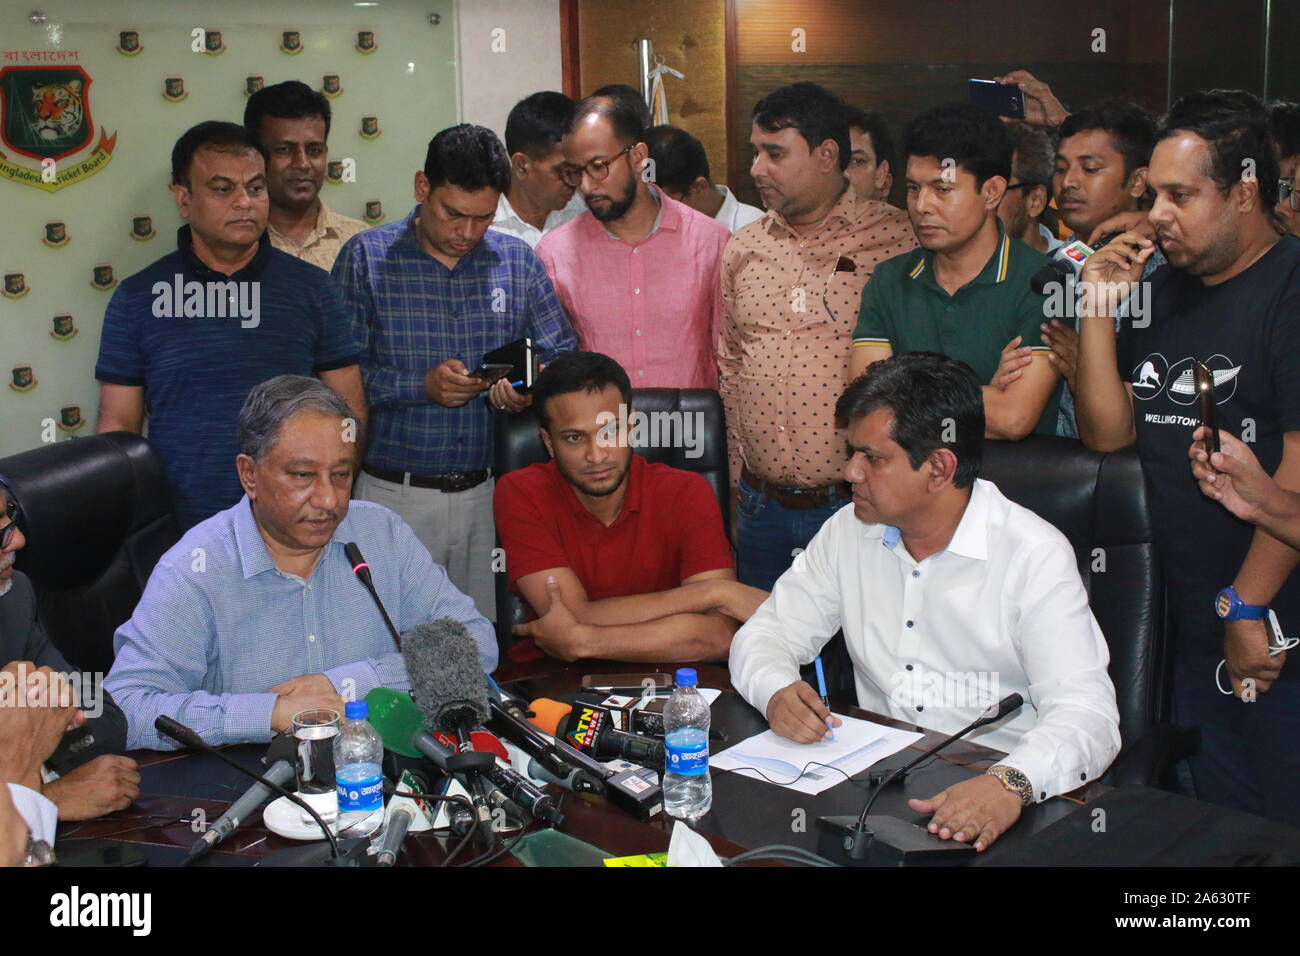 Cricket players call off their strike after 72 hours in the Bangladesh cricketing arena following the Bangladesh Cricket Board’s promise to meet most of their demands, including pay hike and better facilities. Stock Photo